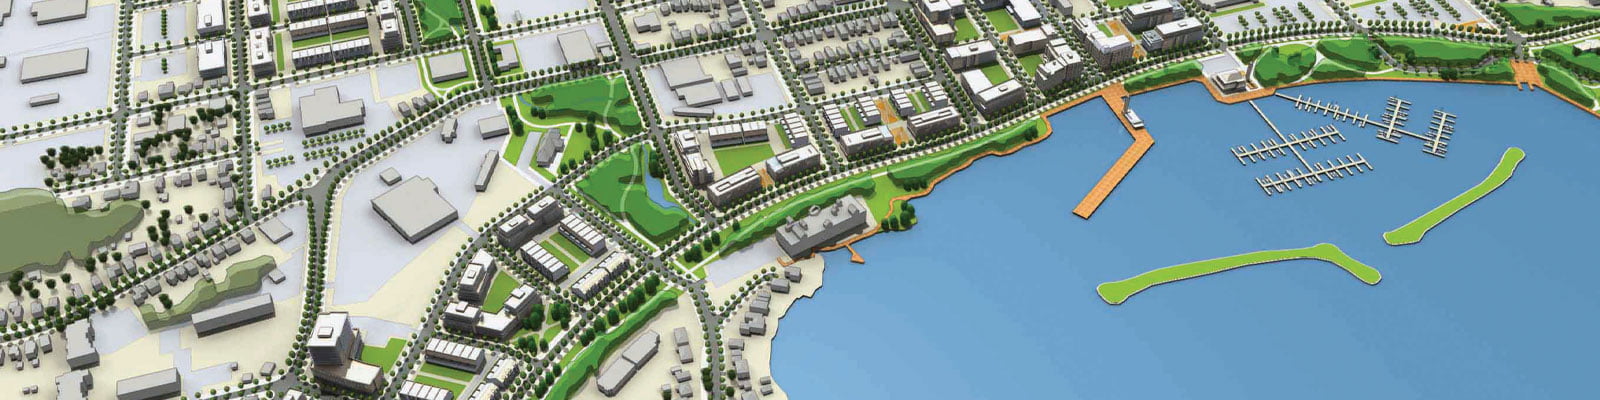 Orillia Downtown and Waterfront Revitalization Plan aerial rendering.